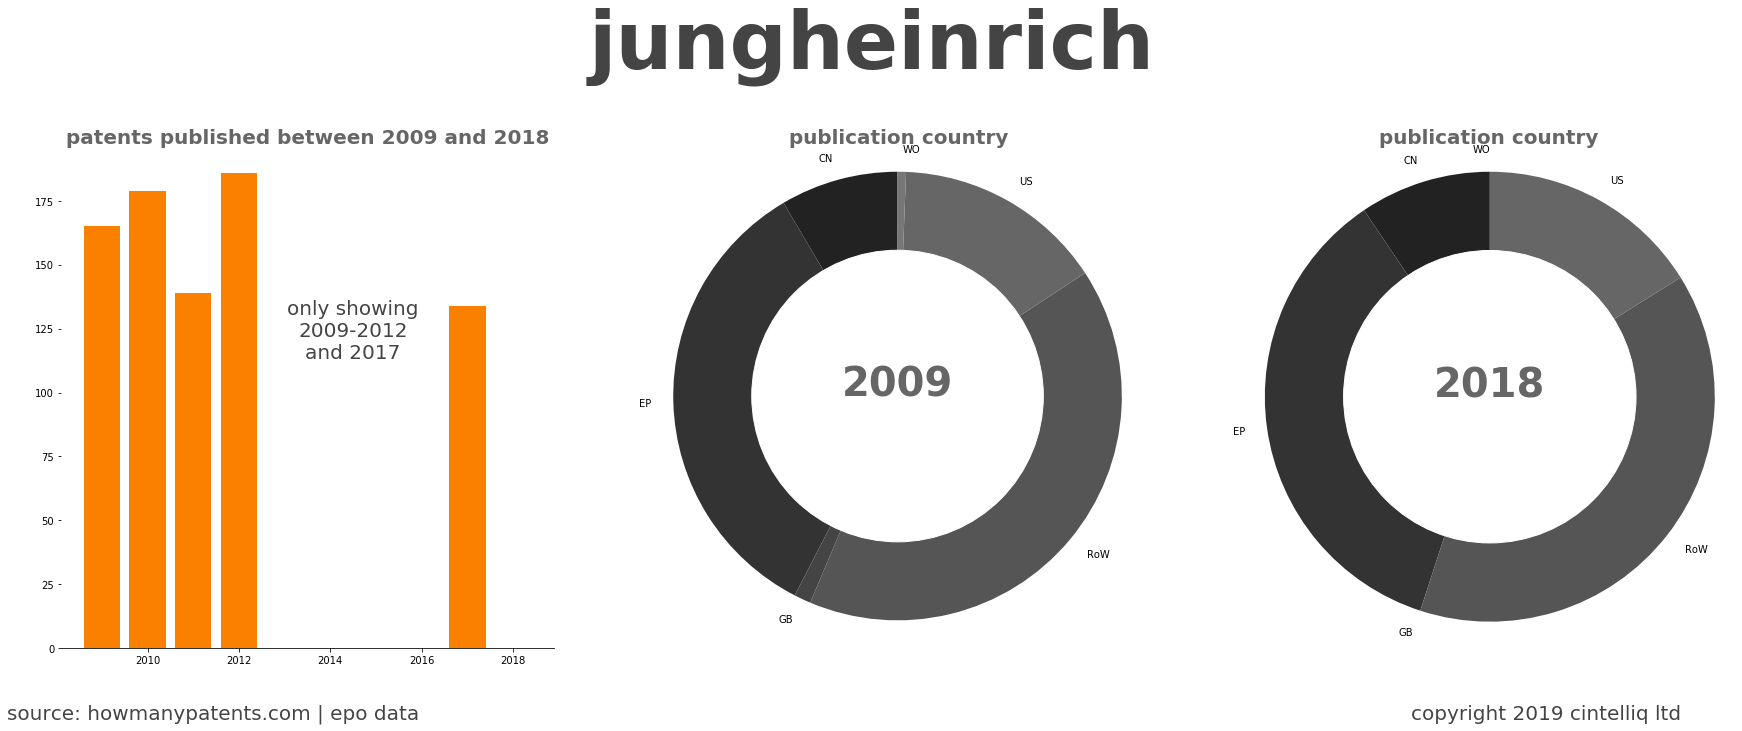 summary of patents for Jungheinrich